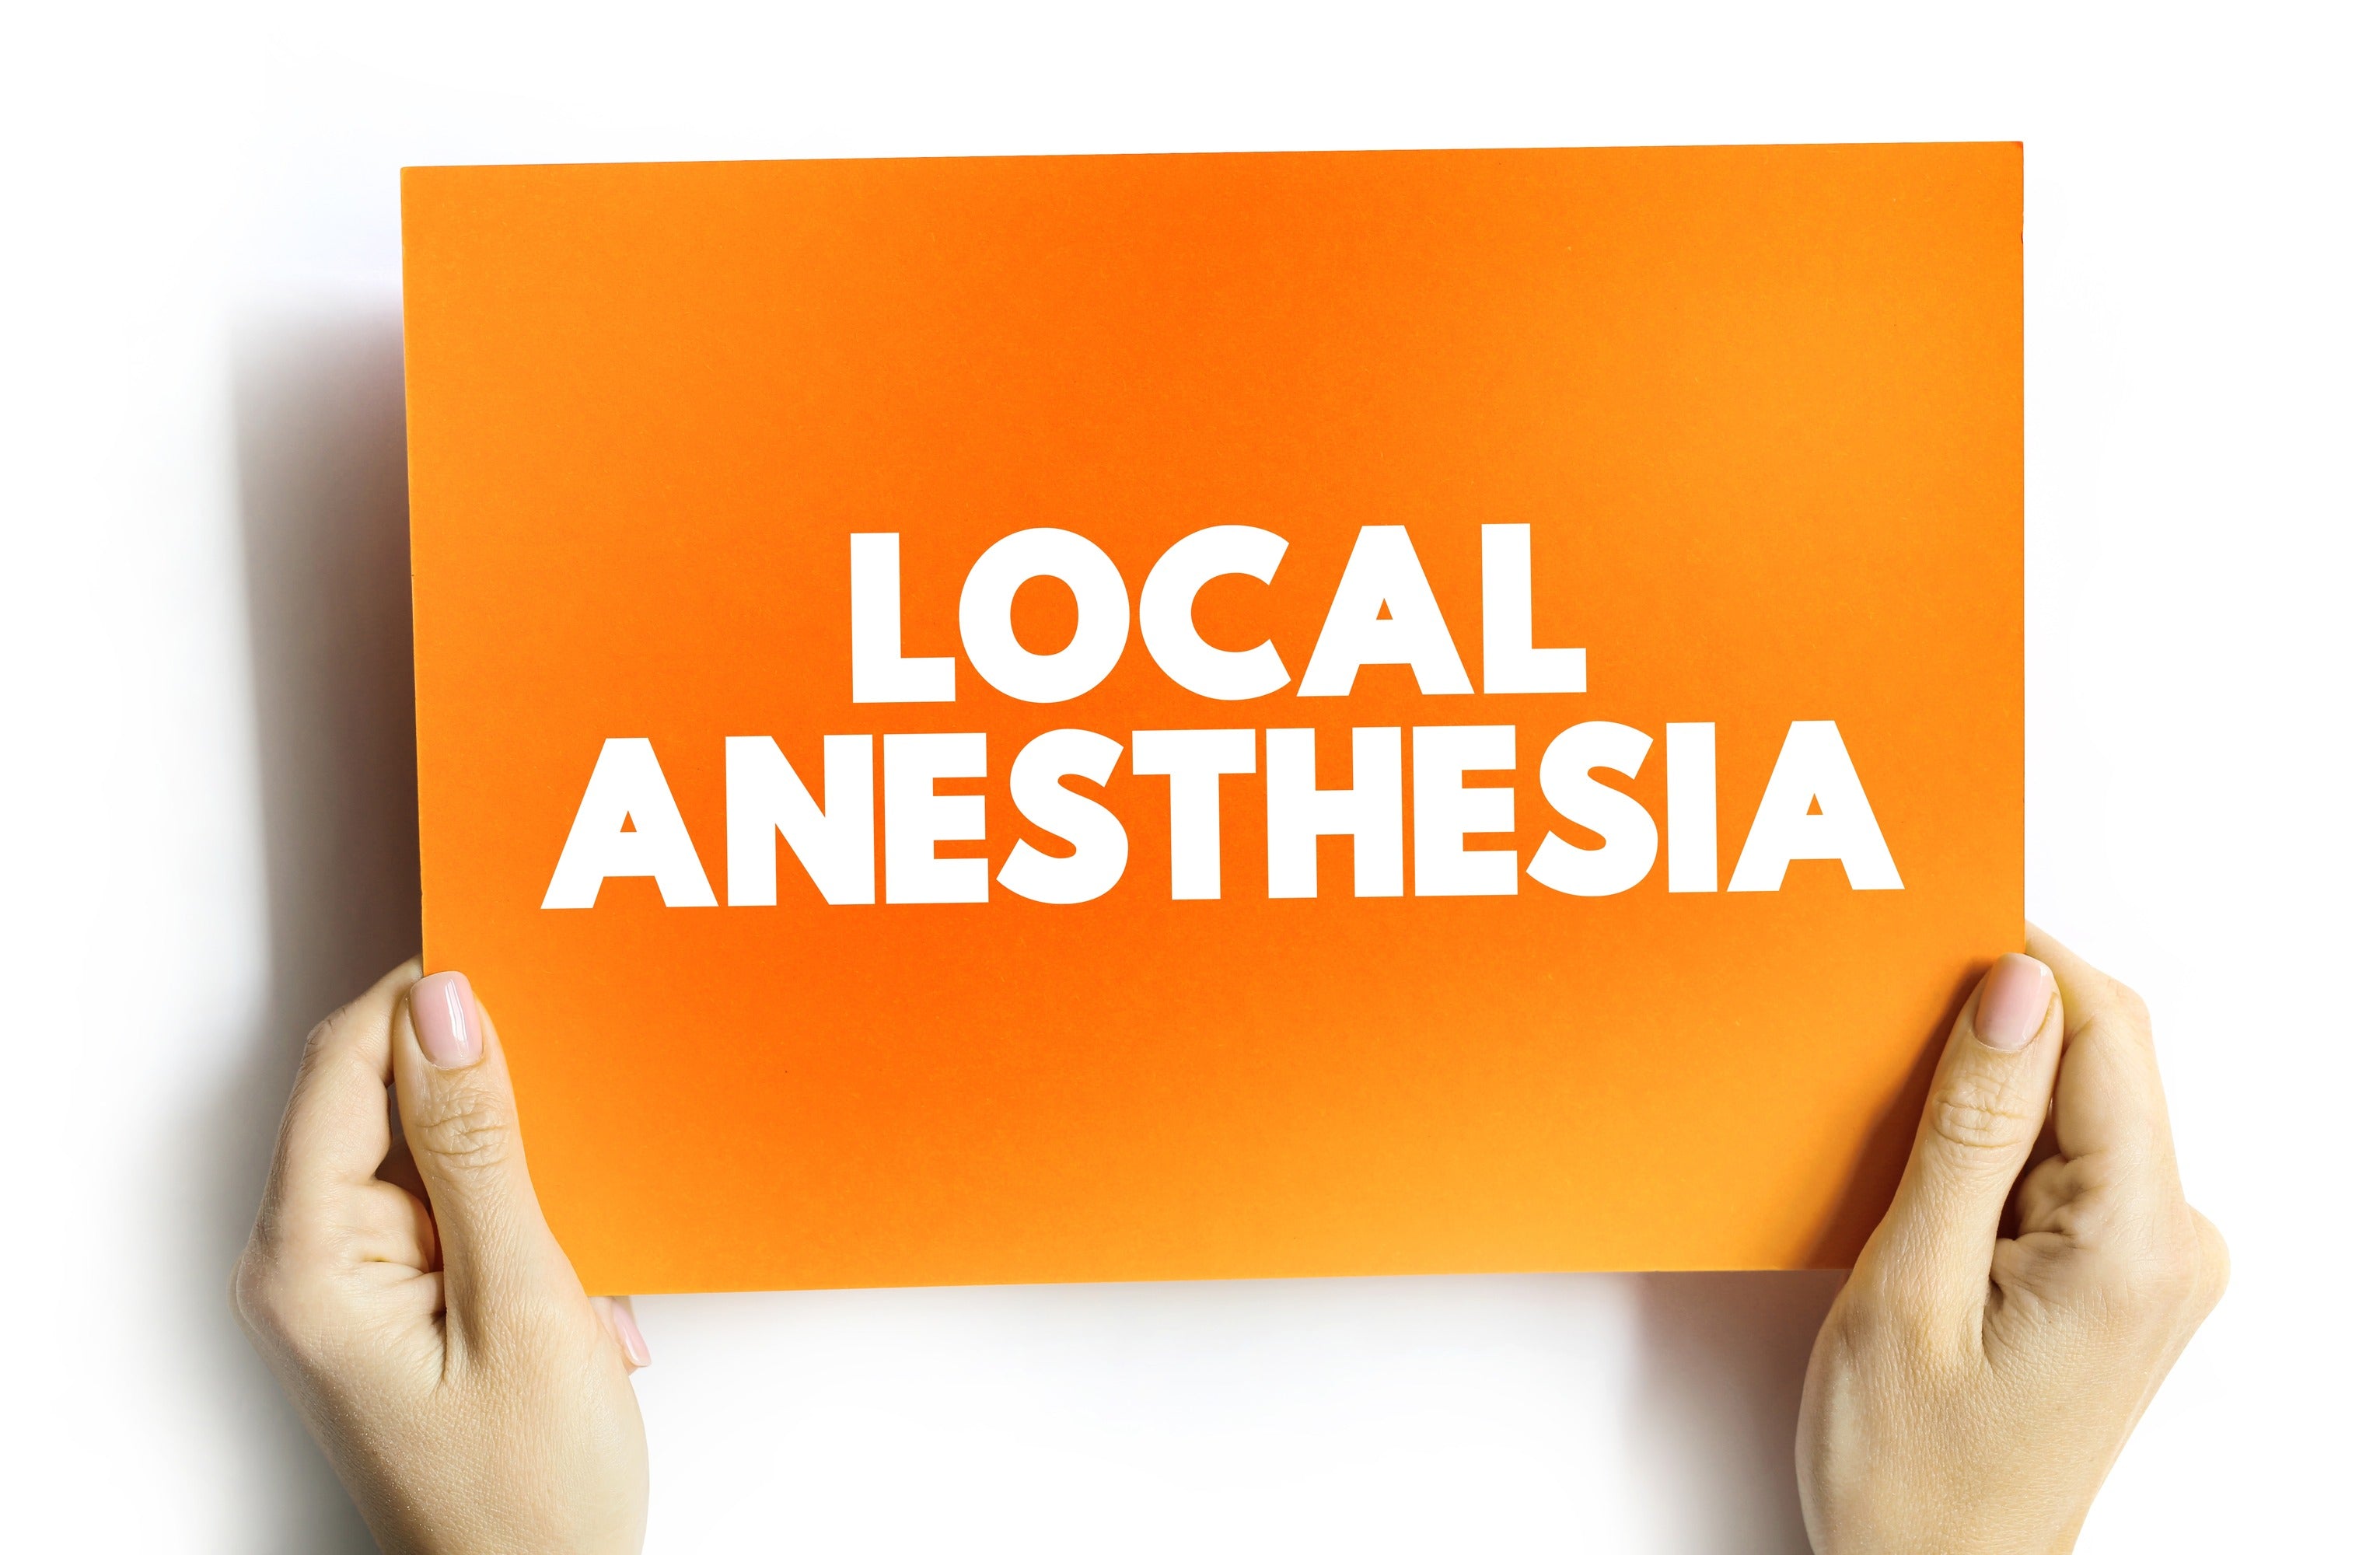 A local anesthesia is a type of anesthesia